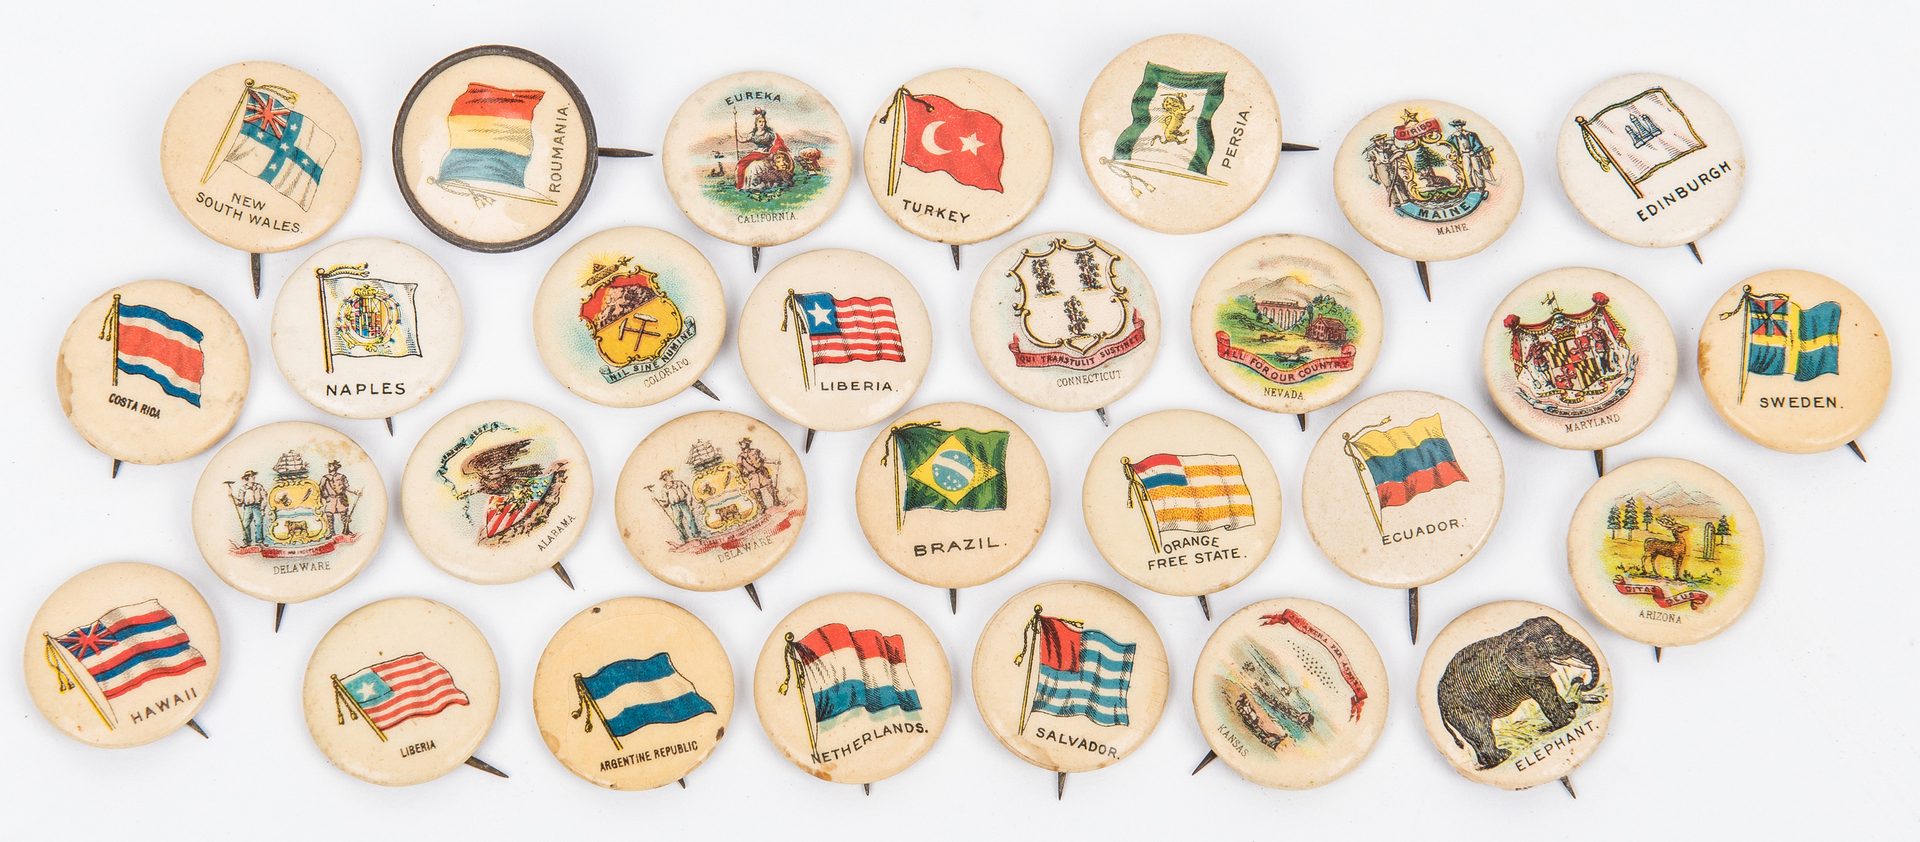 Lot 412: 88 Early Pinback Buttons, incl. Political, Cigarette, WWI, etc.